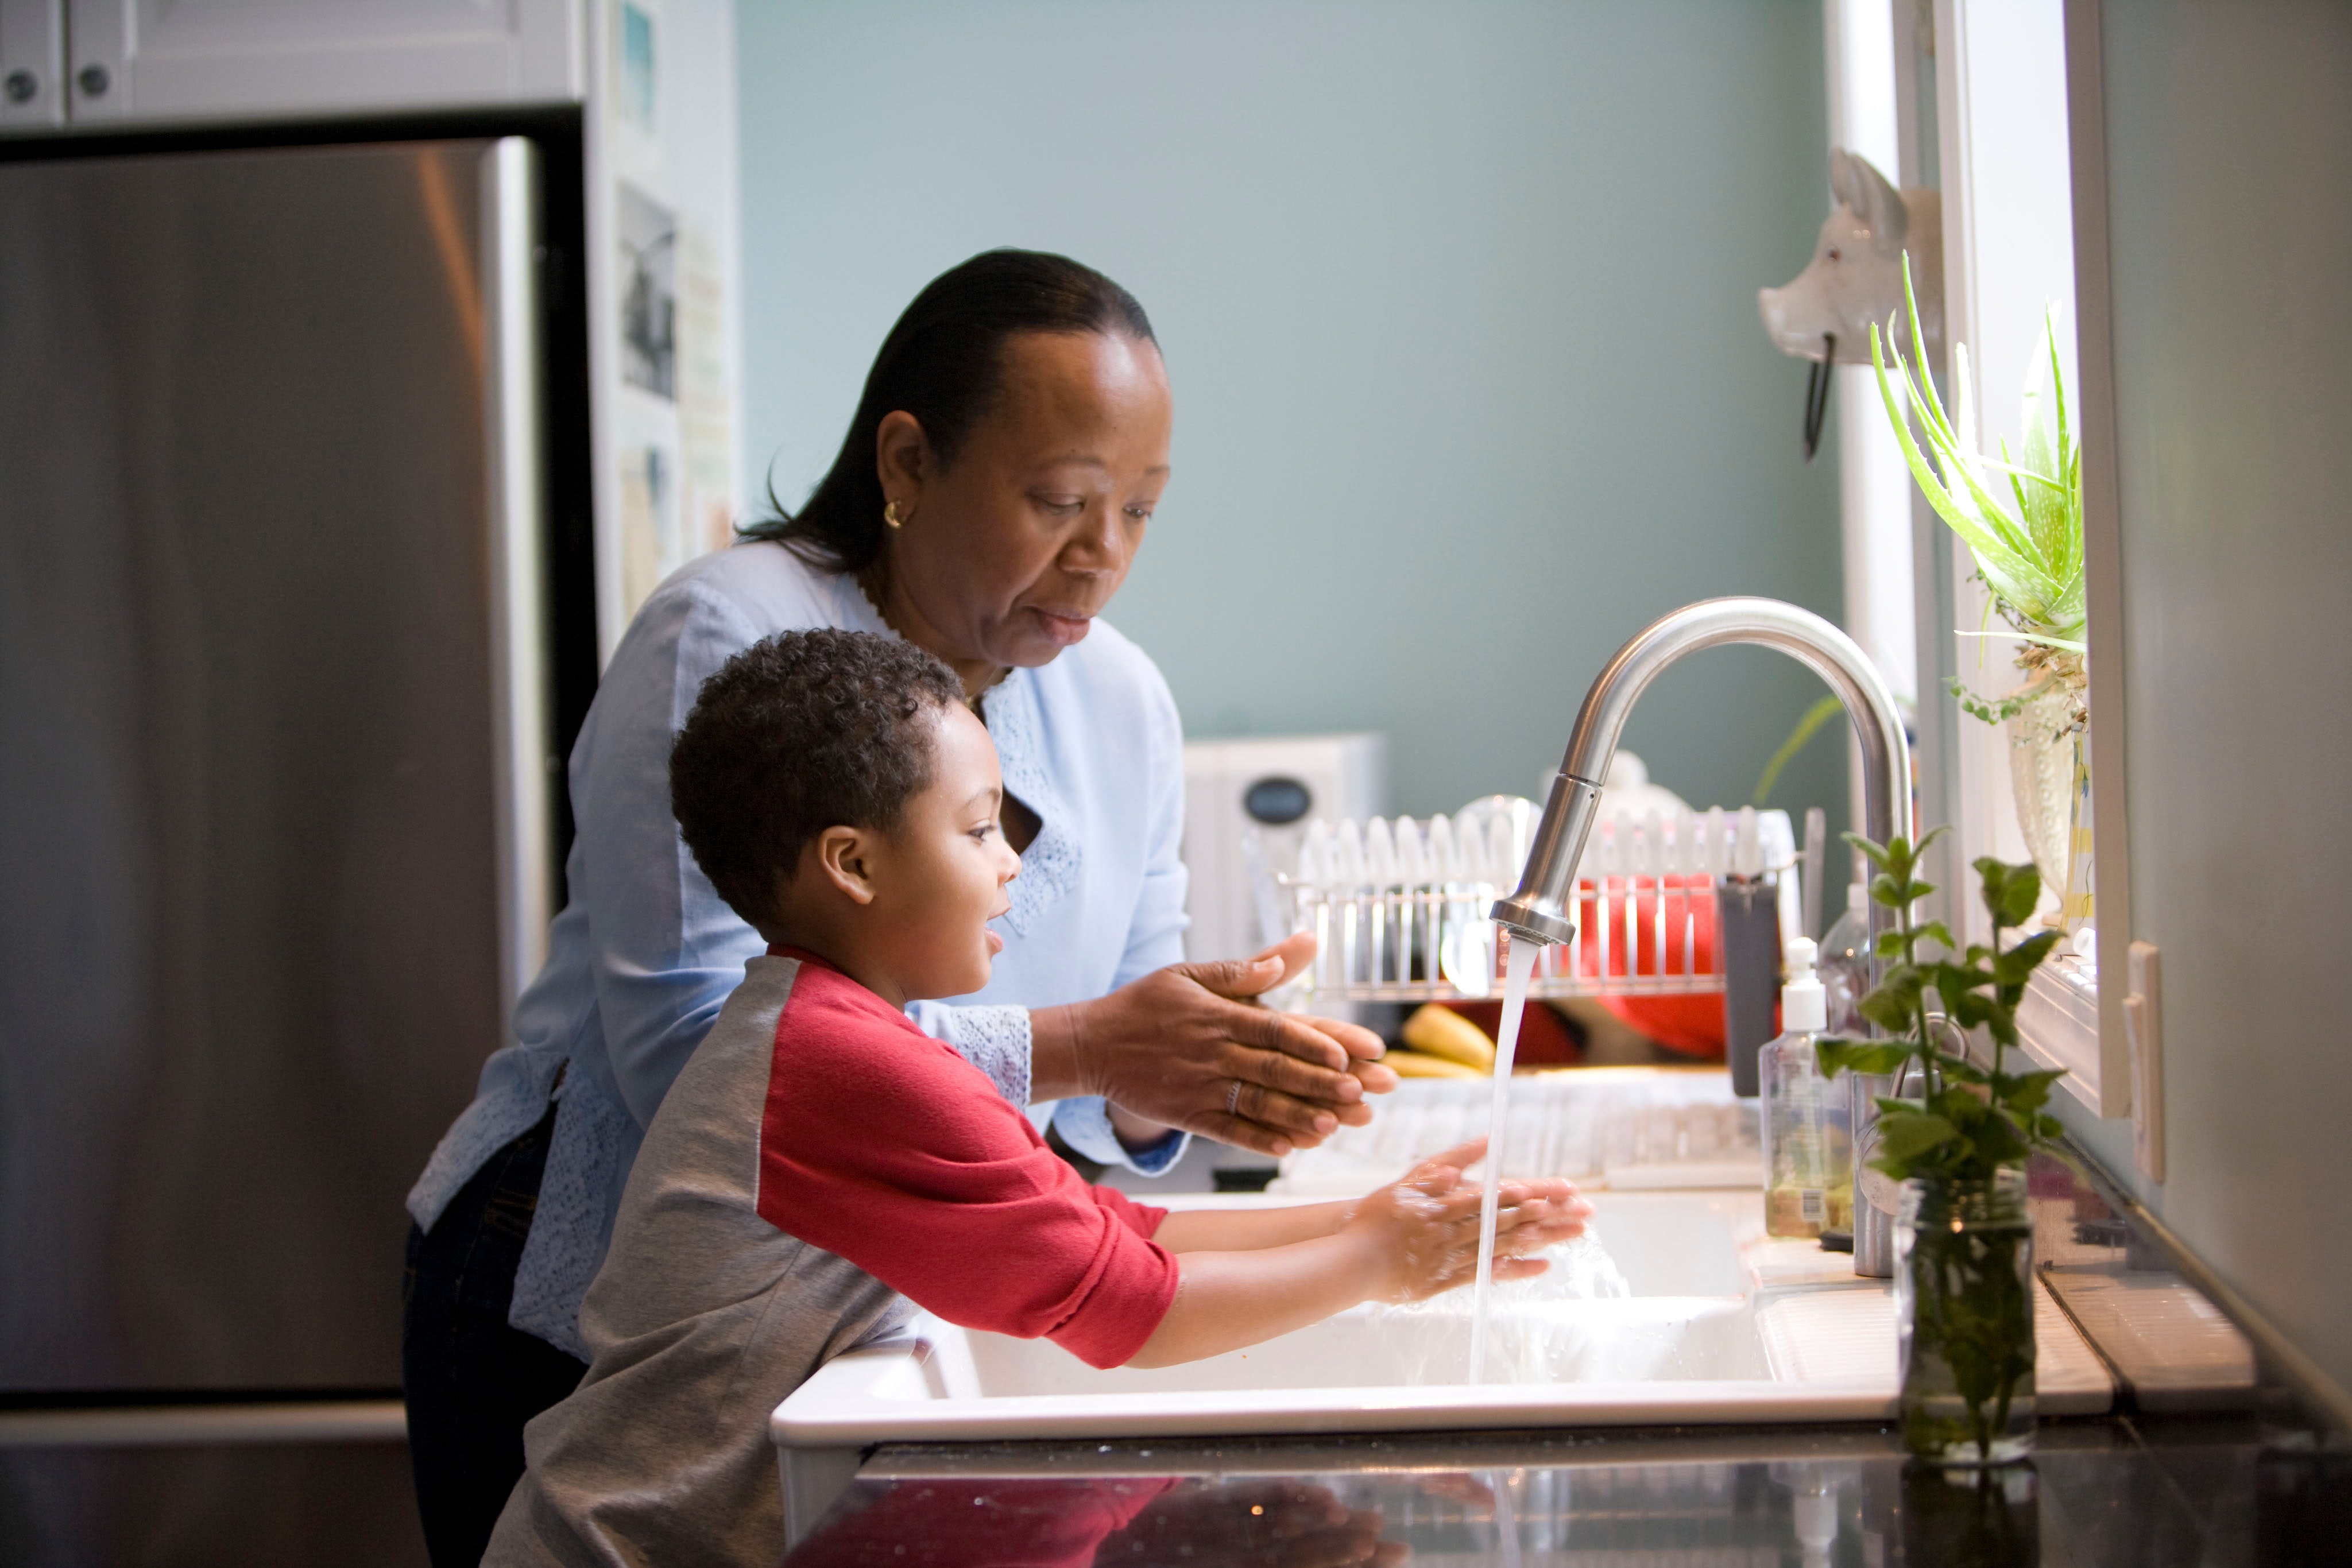 This African-American mother was shown in the process of teaching her young son how to properly wash his hands at their kitchen sink, briskly rubbing his soapy hands together under fresh running tap water, in order to remove germs, and contaminants, thereby, reducing the spread of pathogens, and the ingestion of environmental chemicals or toxins.